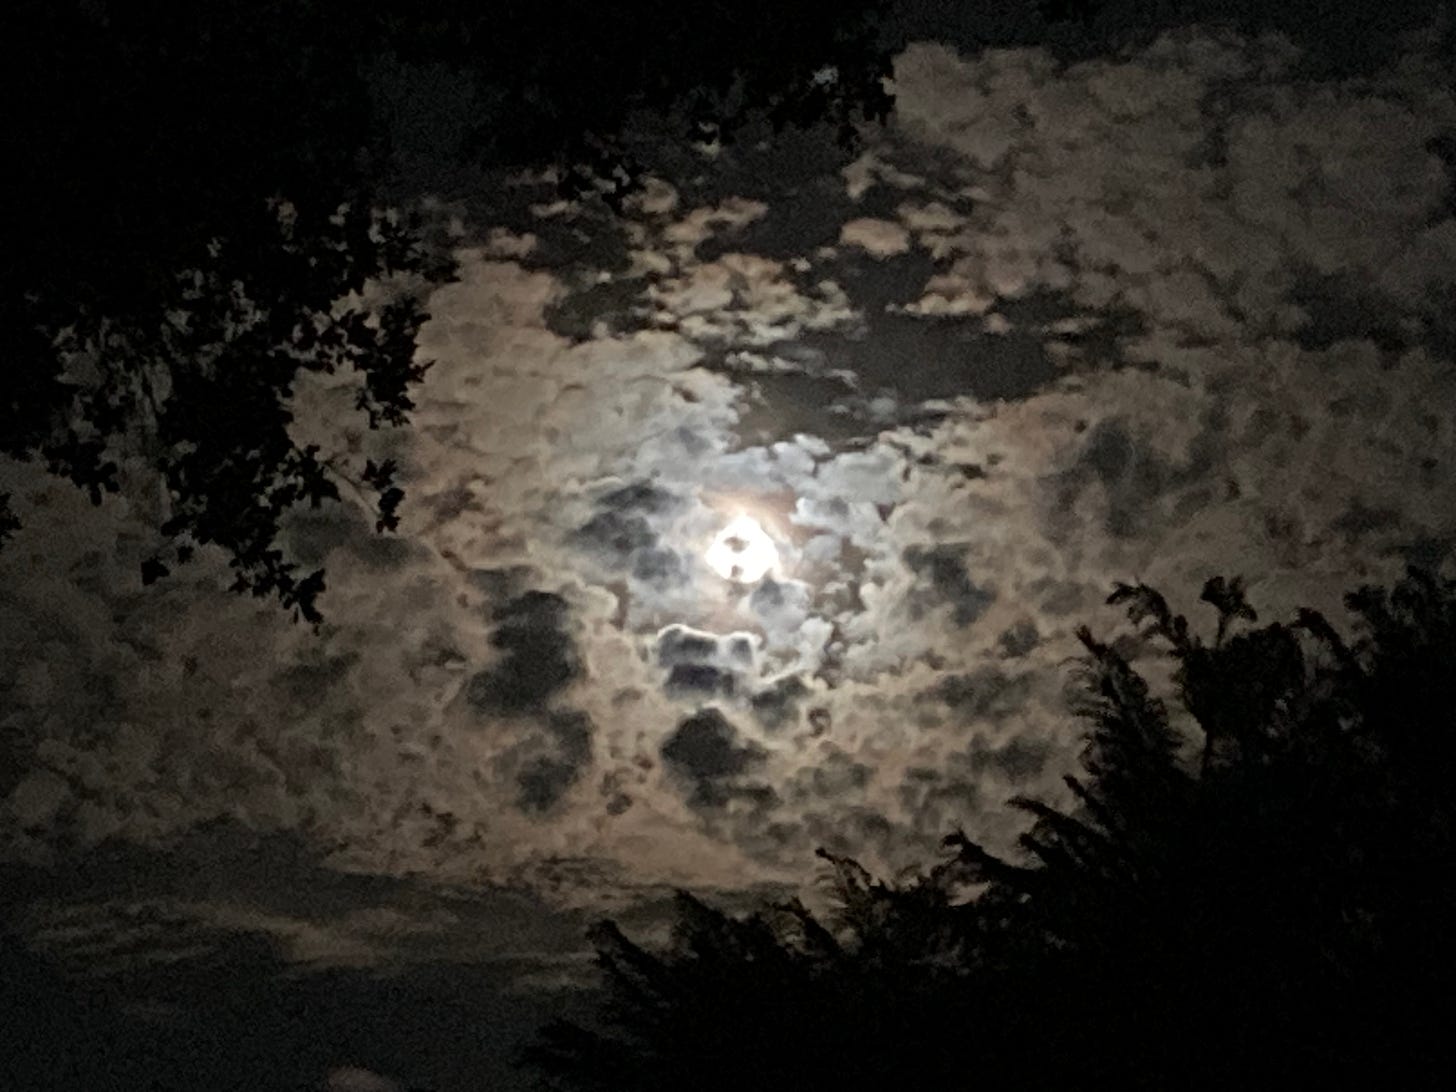 A cloudy night sky with the moon peeking through the clouds